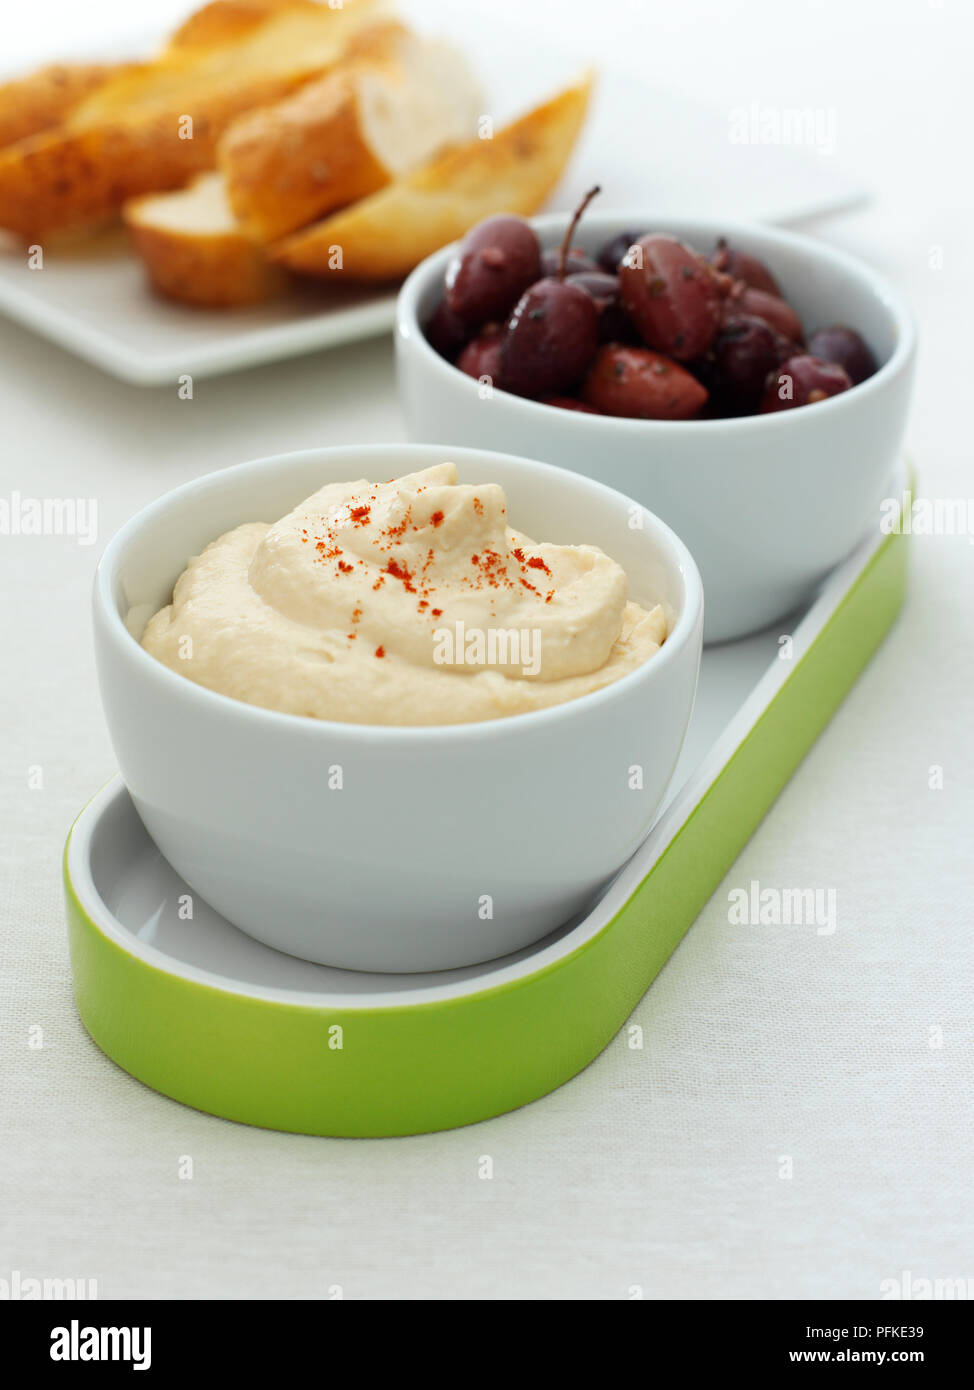 Bowl of Taramasalata, dip made from cod's roe, served with bowl of black olives and sliced white bread, close-up Stock Photo